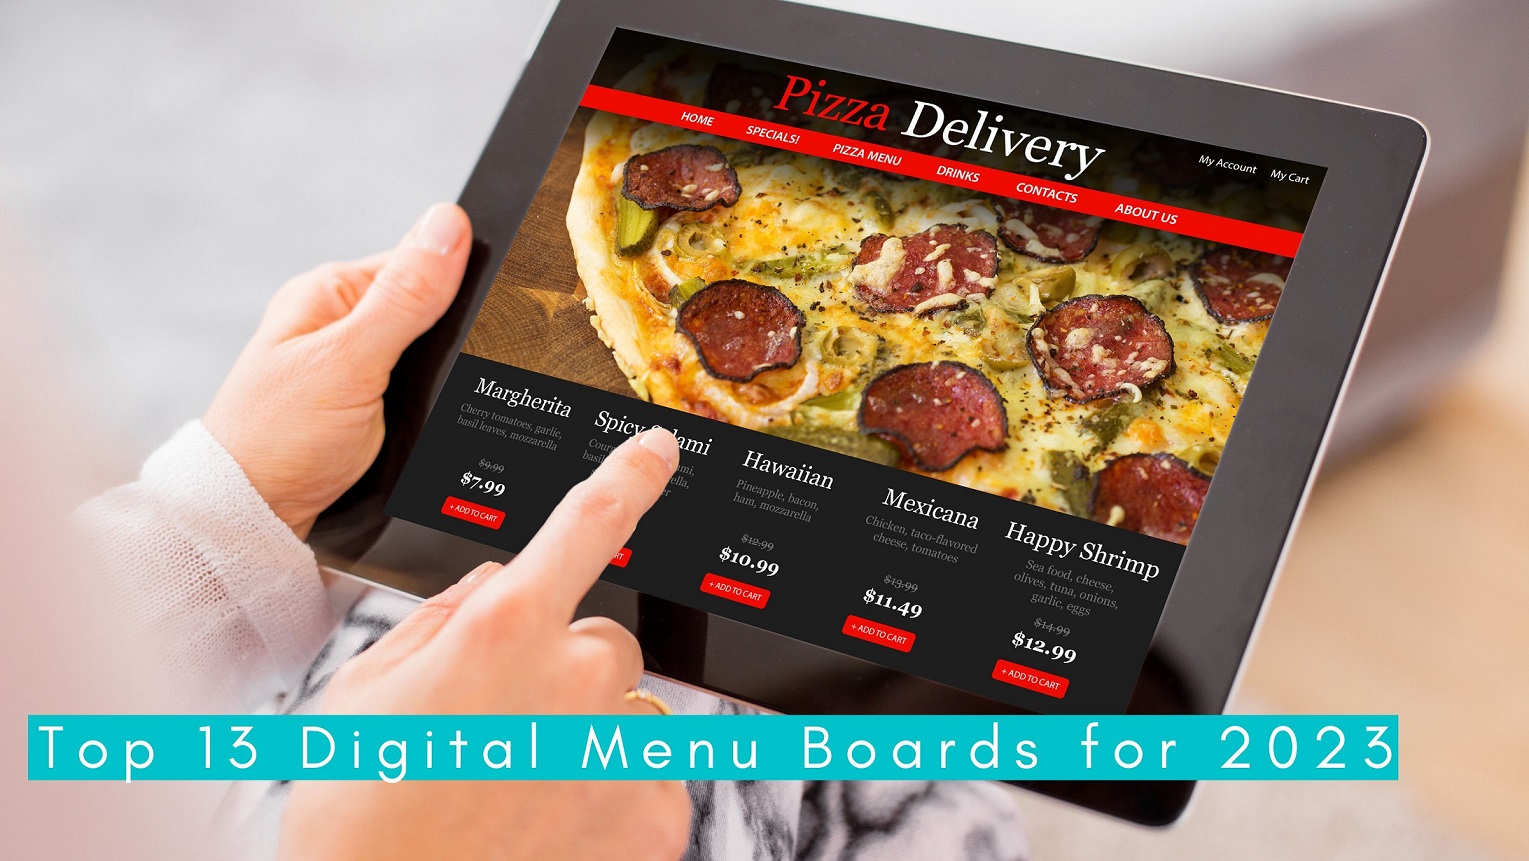 You are currently viewing Top 13 Digital Menu Boards for 2023